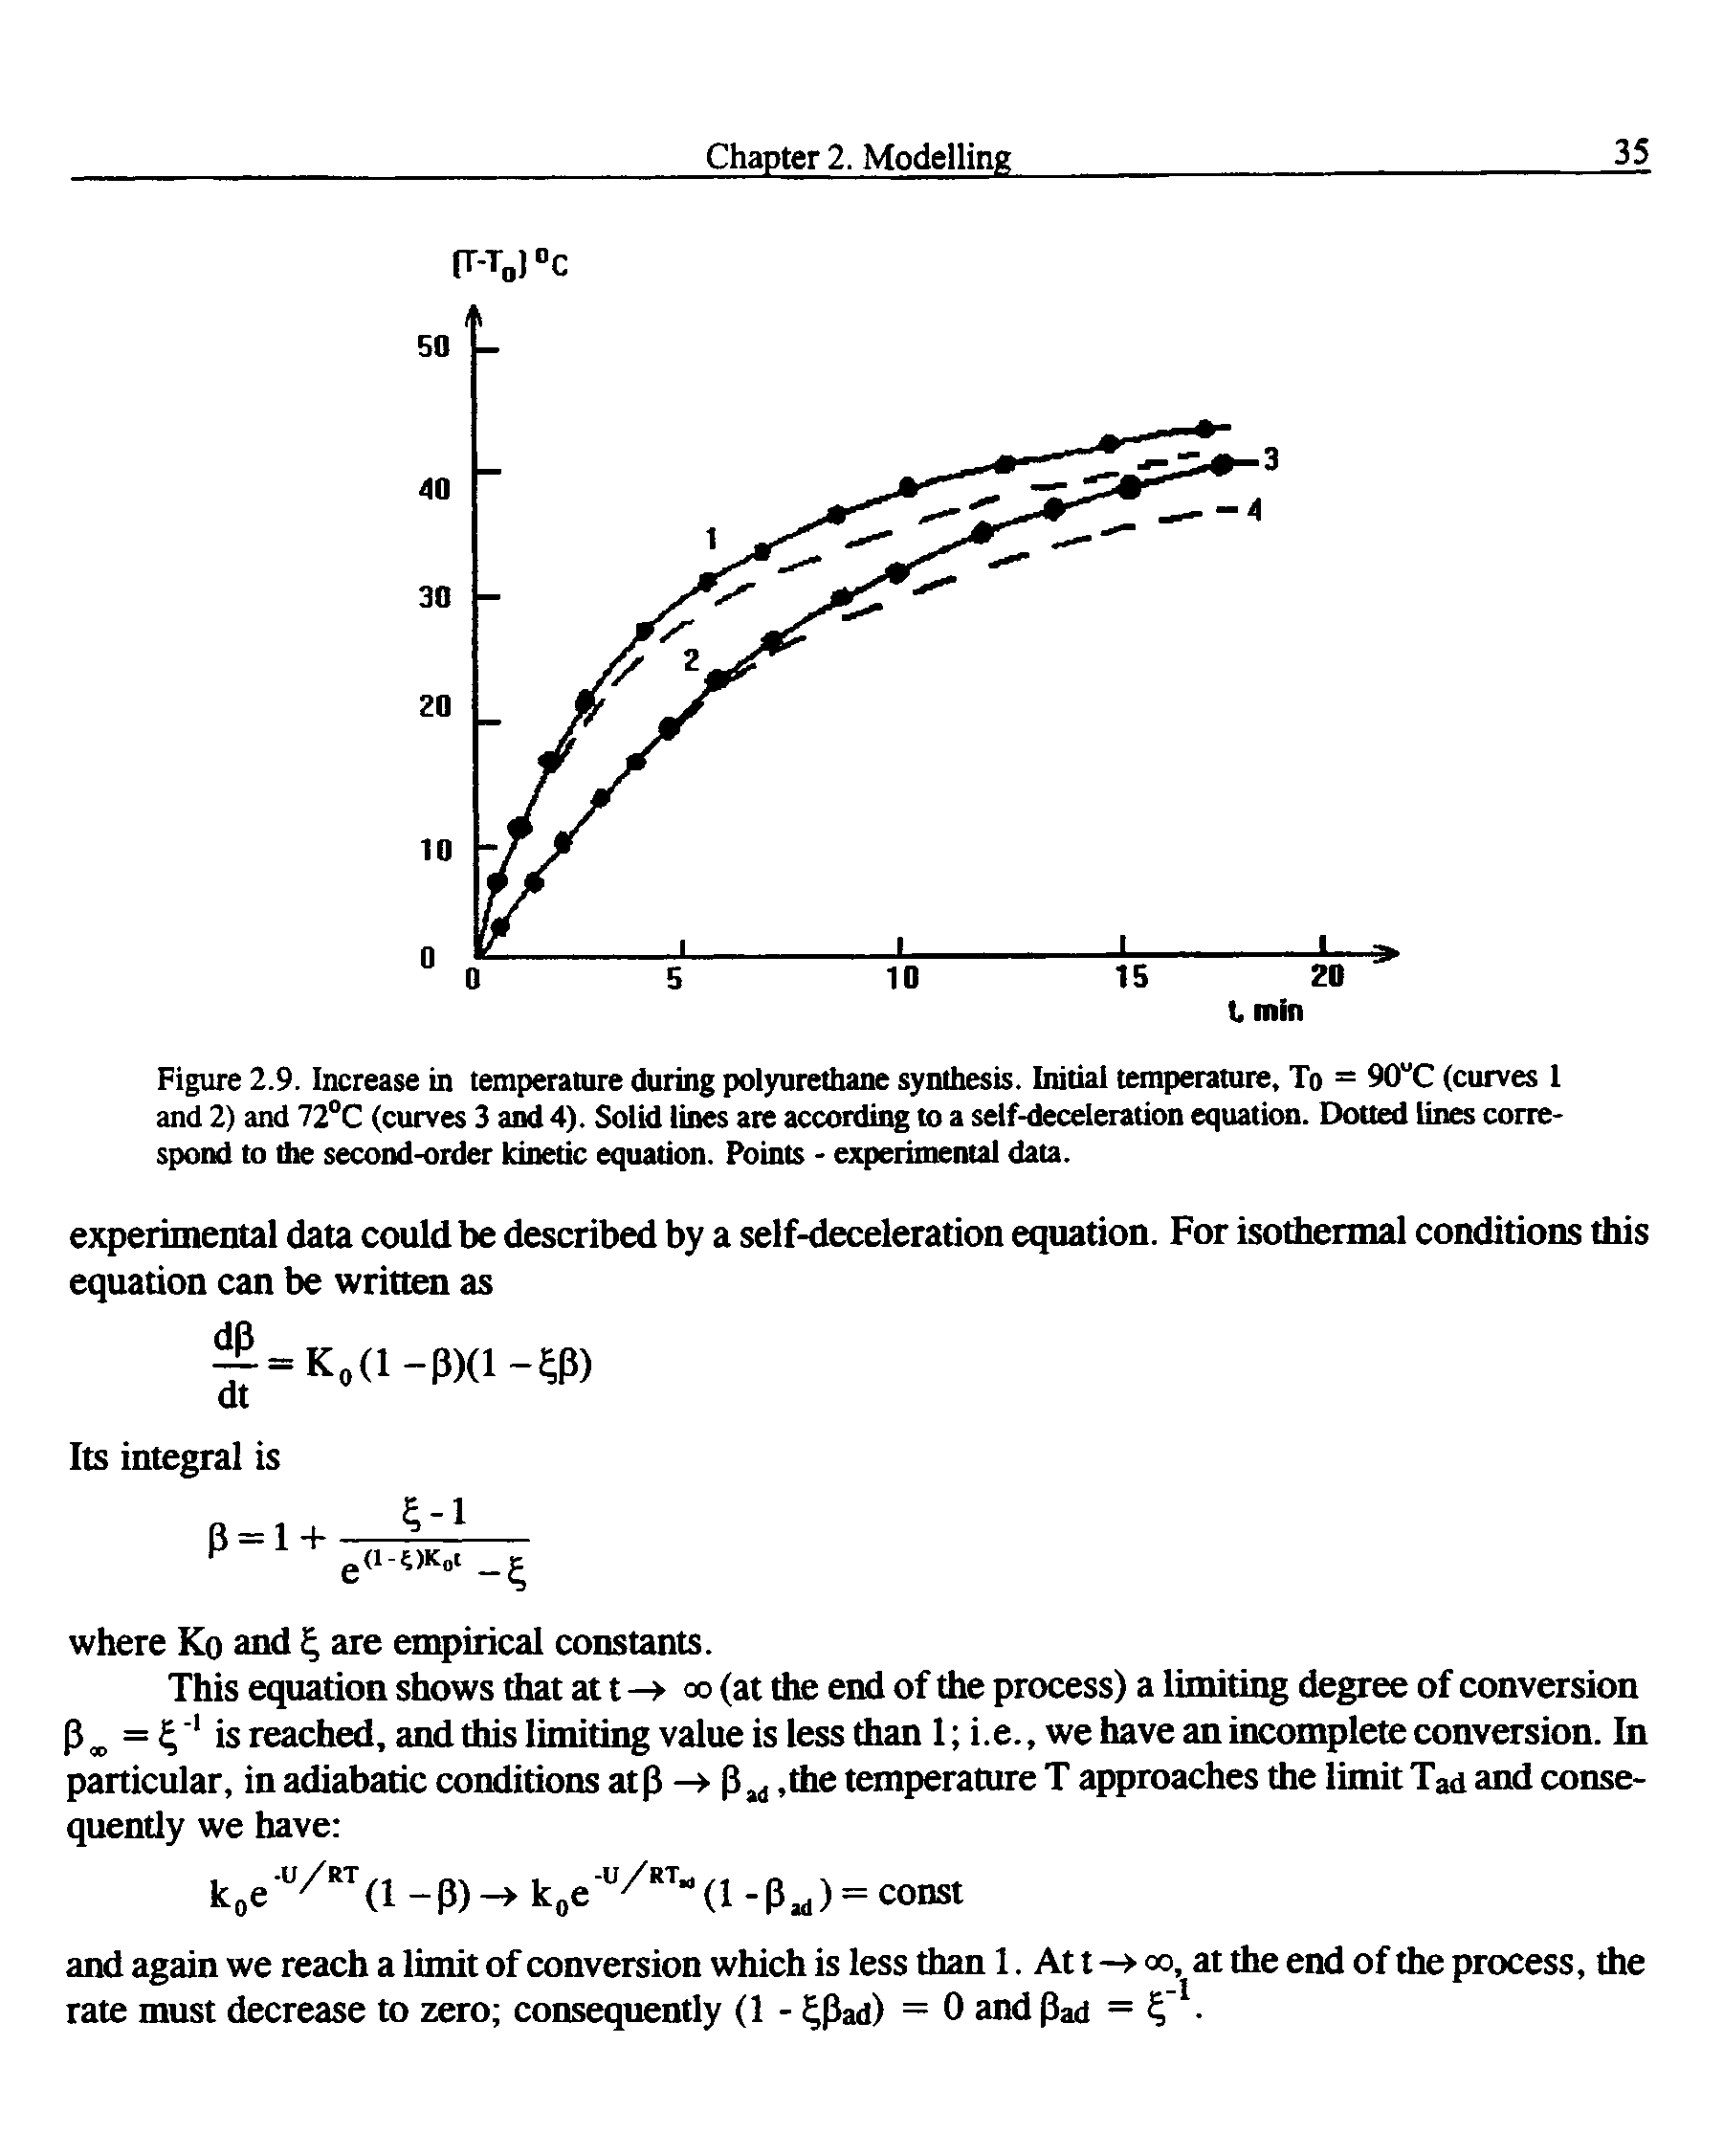 Figure 2.9. Increase in temperature during polyurethane synthesis. Initial temperature. To = 90°C (curves 1 and 2) and 72°C (curves 3 and 4). Solid lines are according to a self-deceleration equation. Dotted lines correspond to the second-order kinetic equation. Points - experimental data.